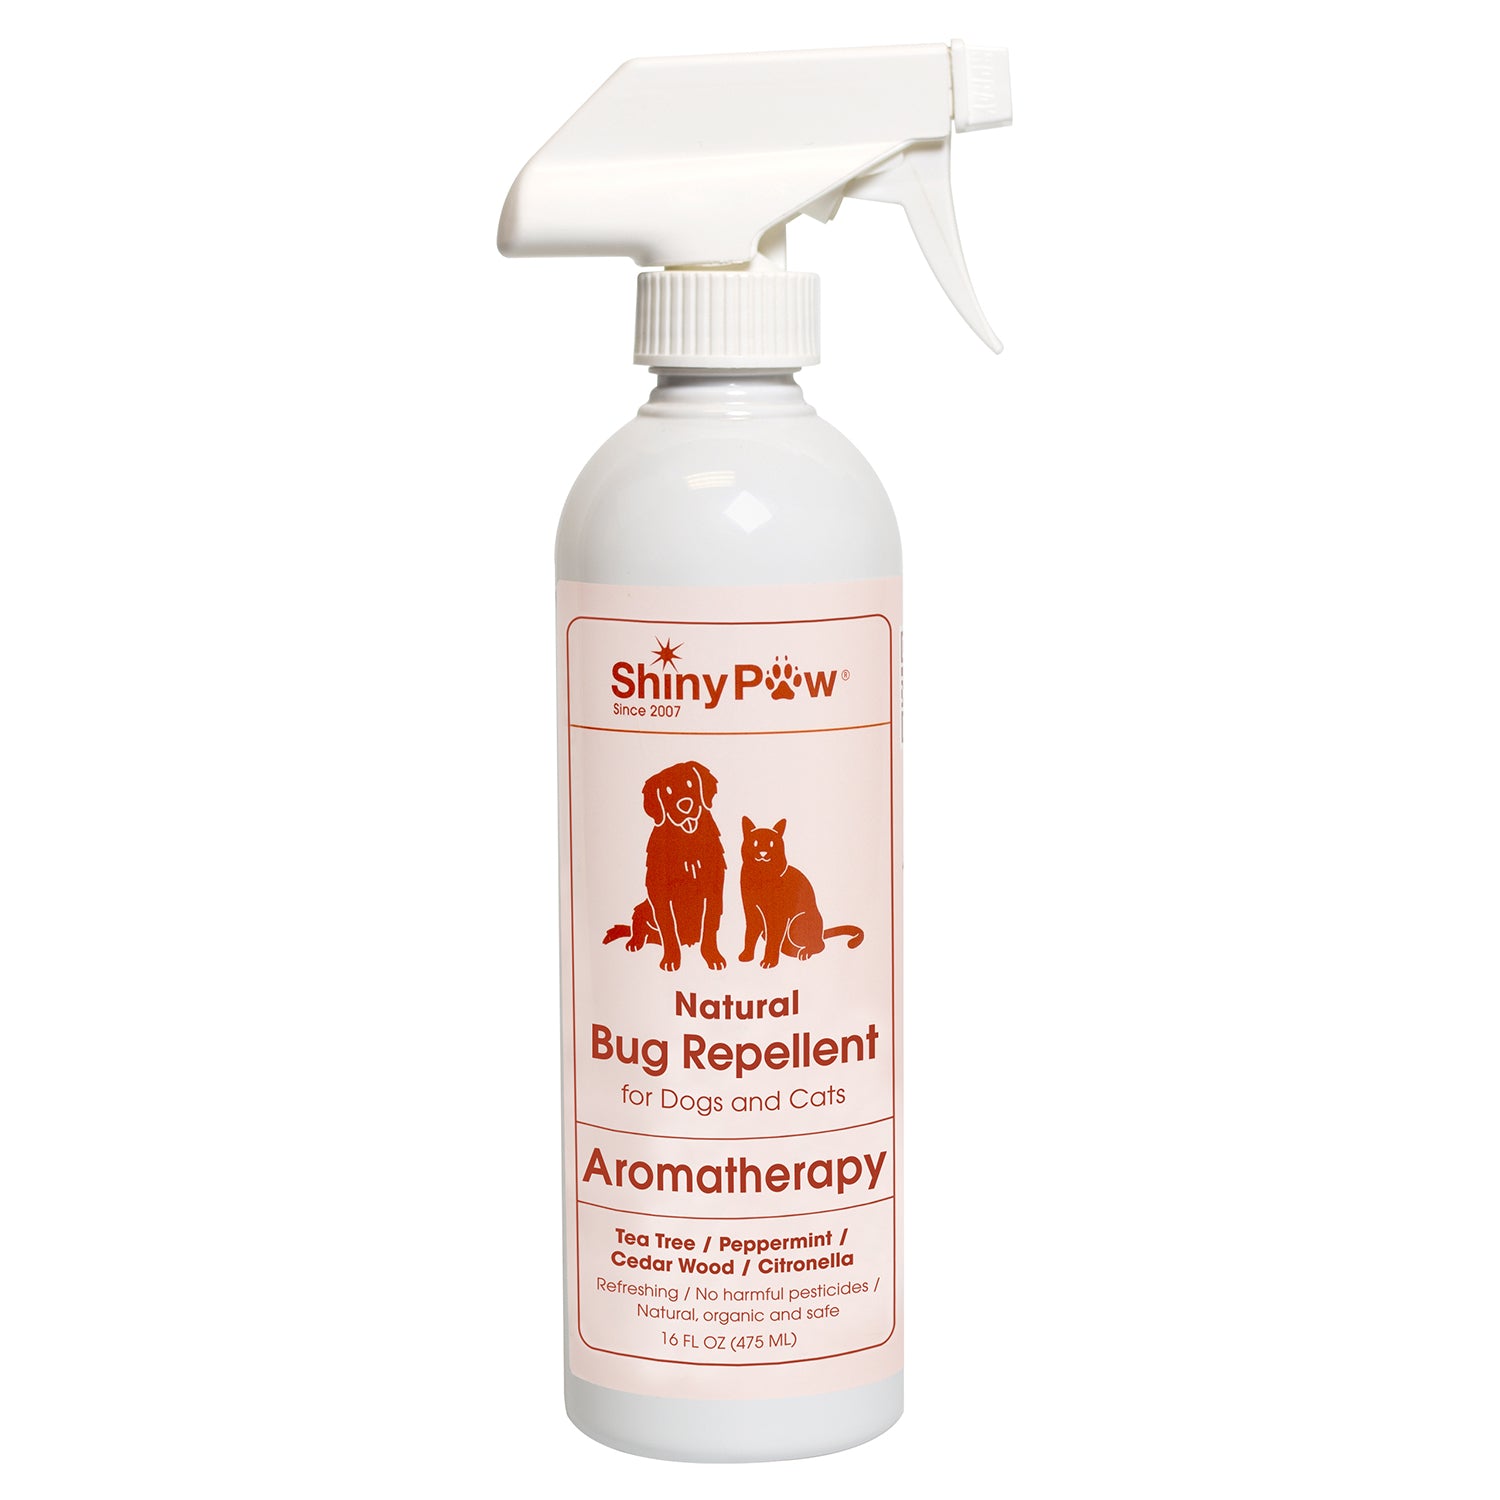 Shiny Paw Natural Bug Repellent Dogs Cats Aromatherapy Tea Tree Peppermint Cedar Wood Citronella 16oz